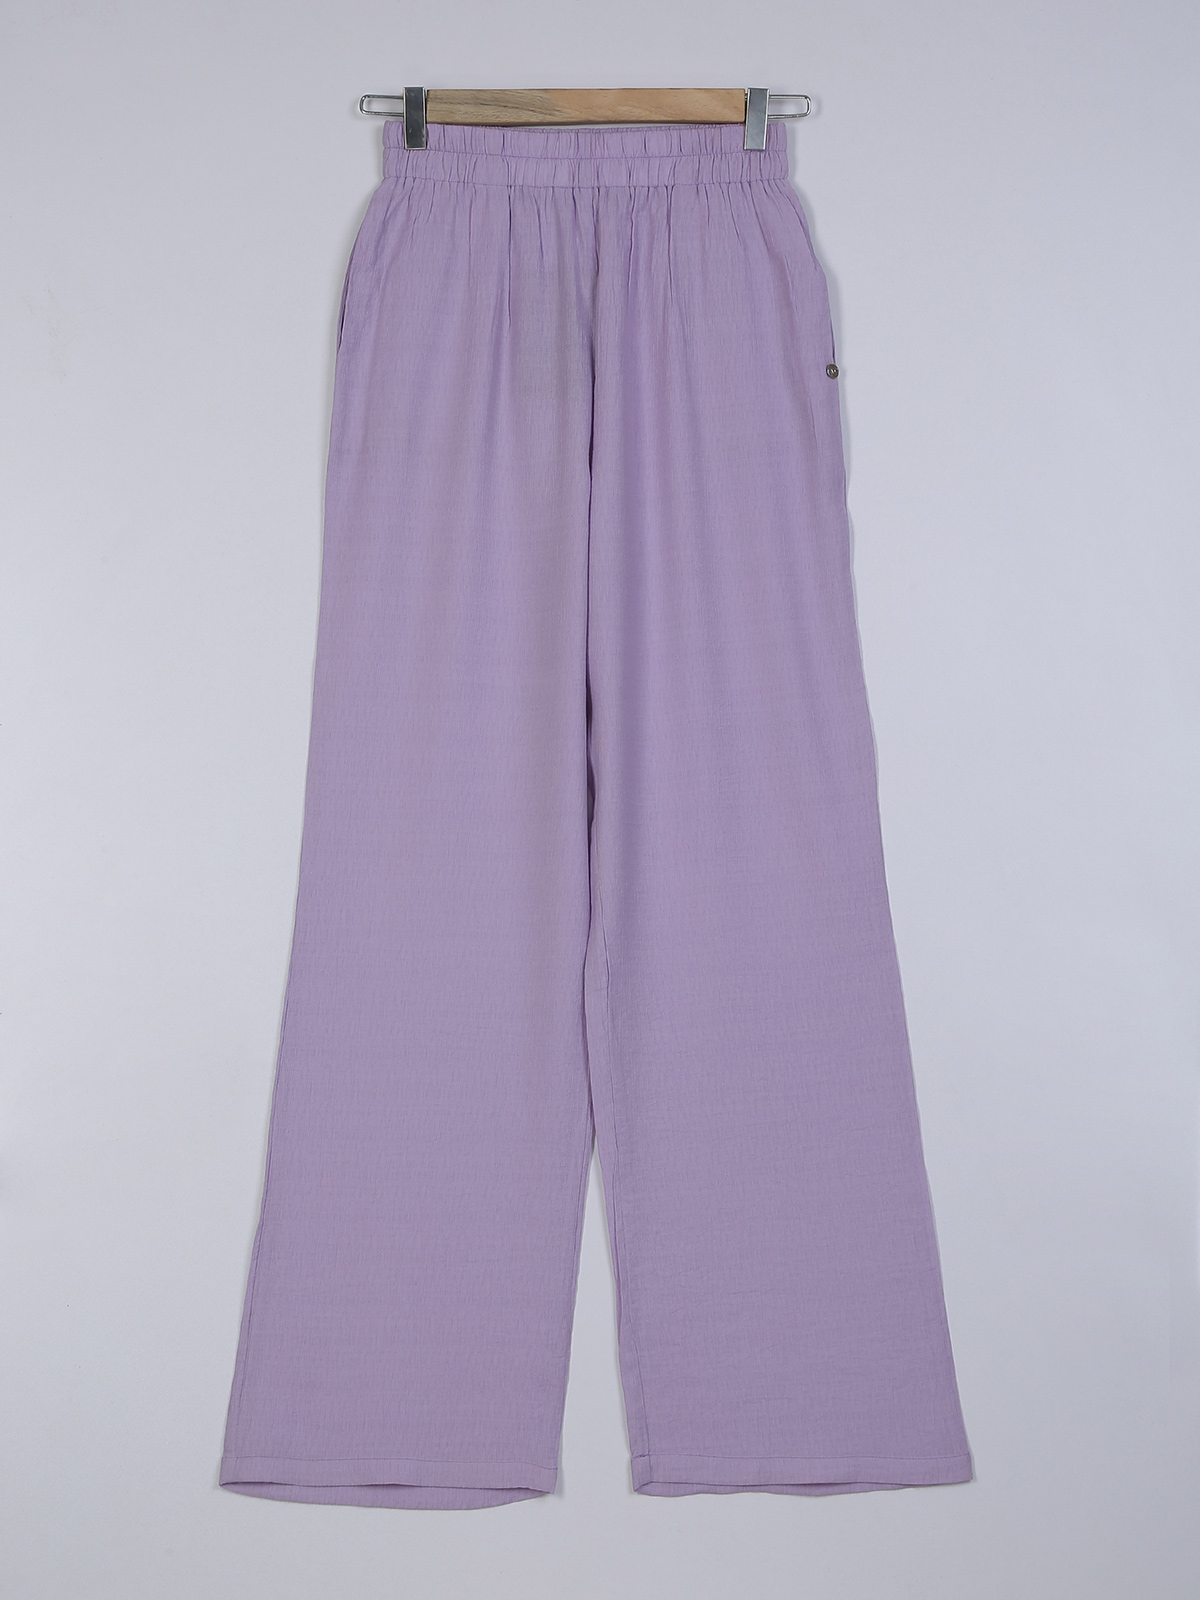 Deal lilac purple cotton casual wear palazzo - G3-WFP75